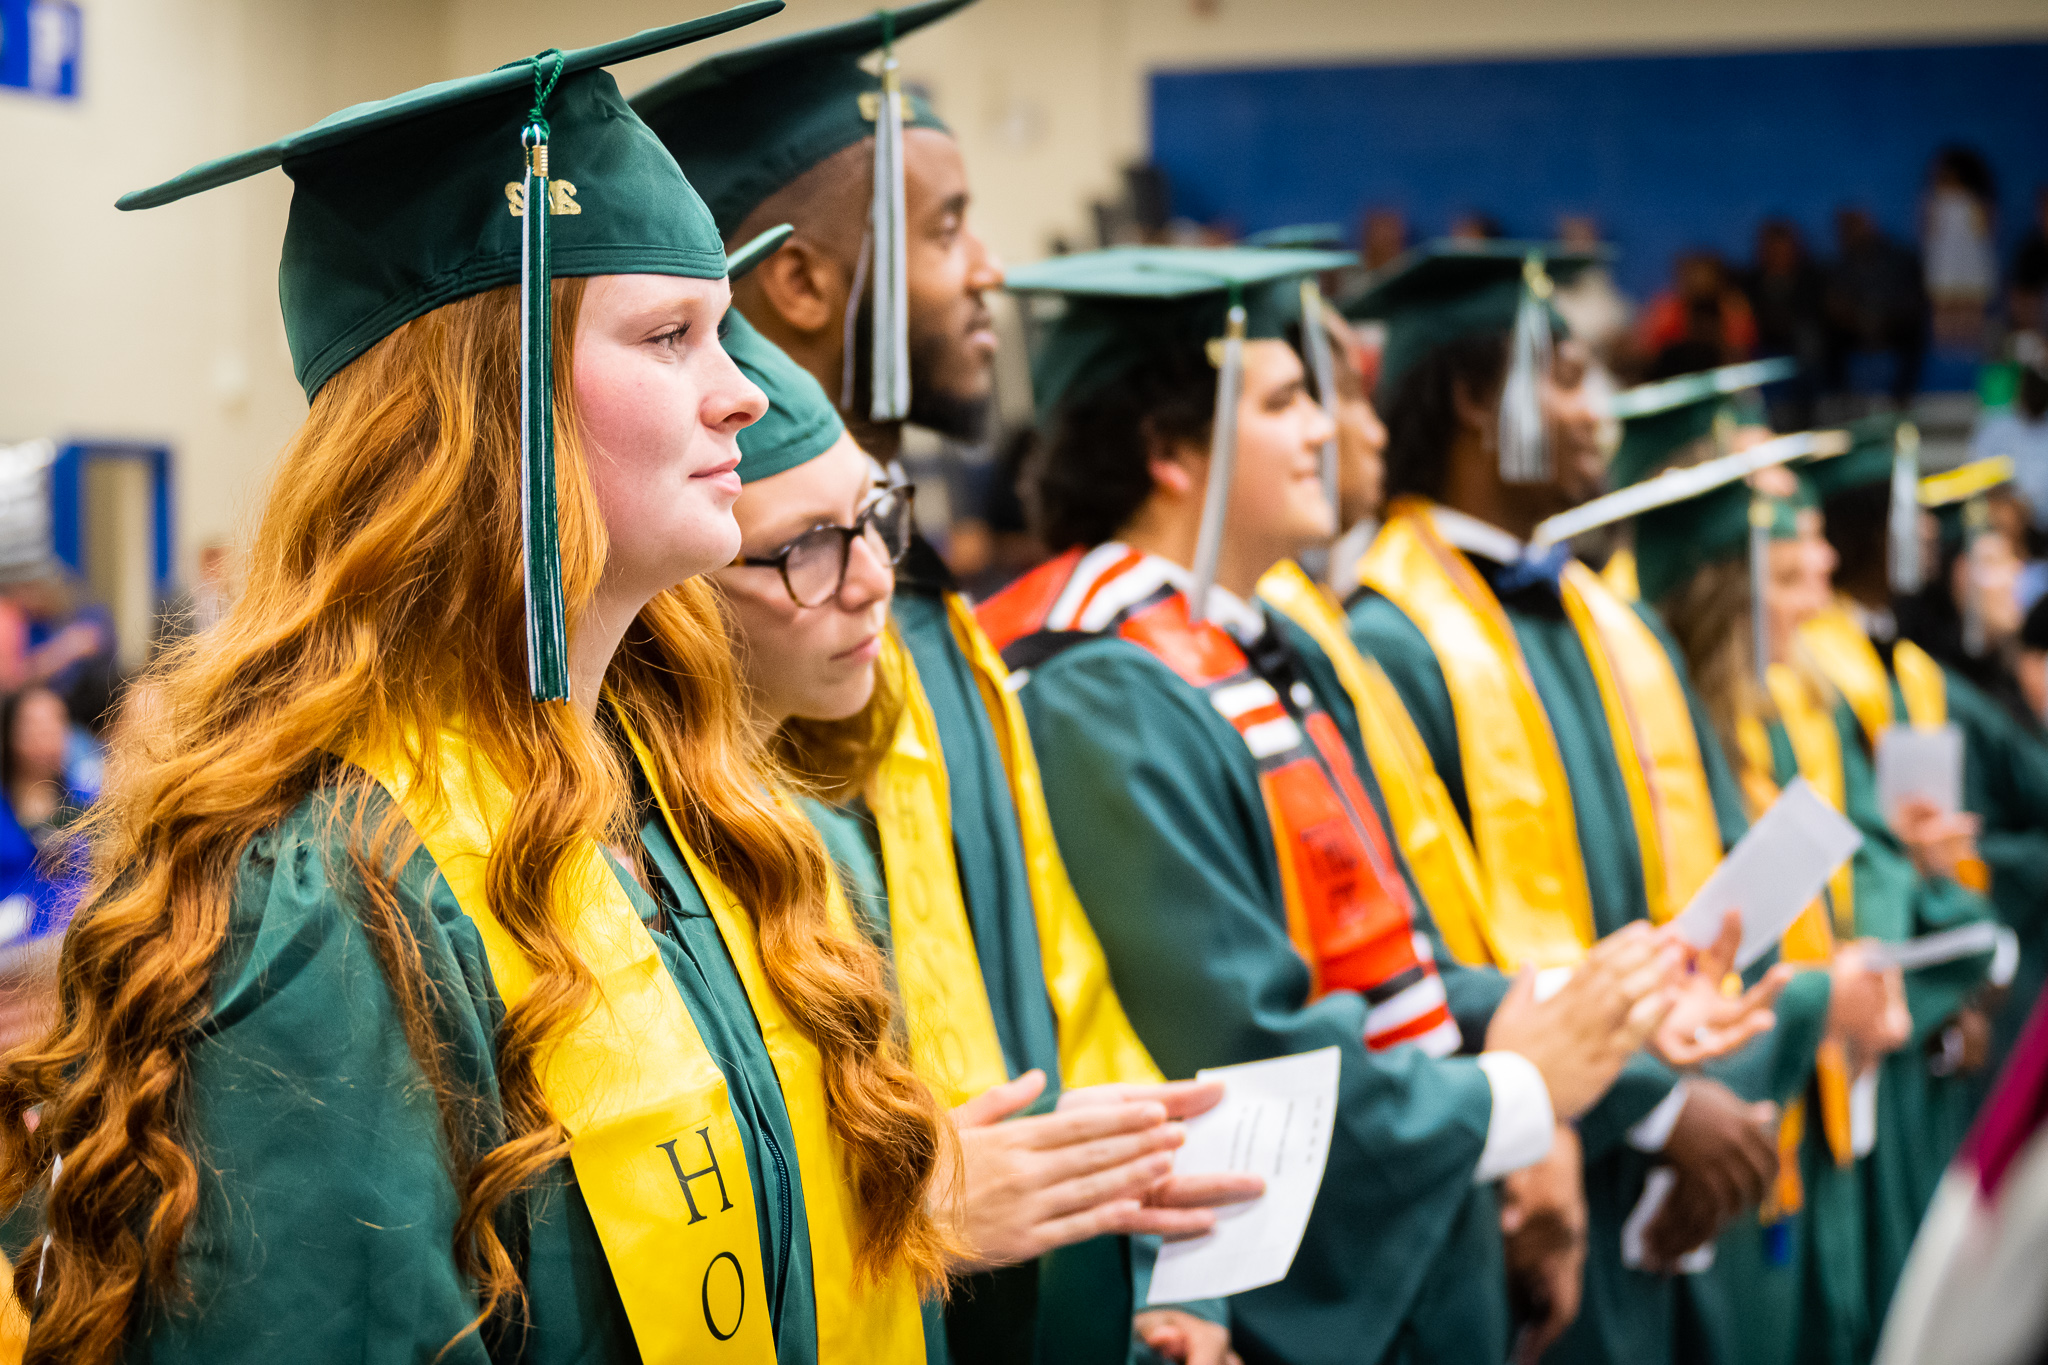 Graduates standing in row waiting to line up to receive diploma